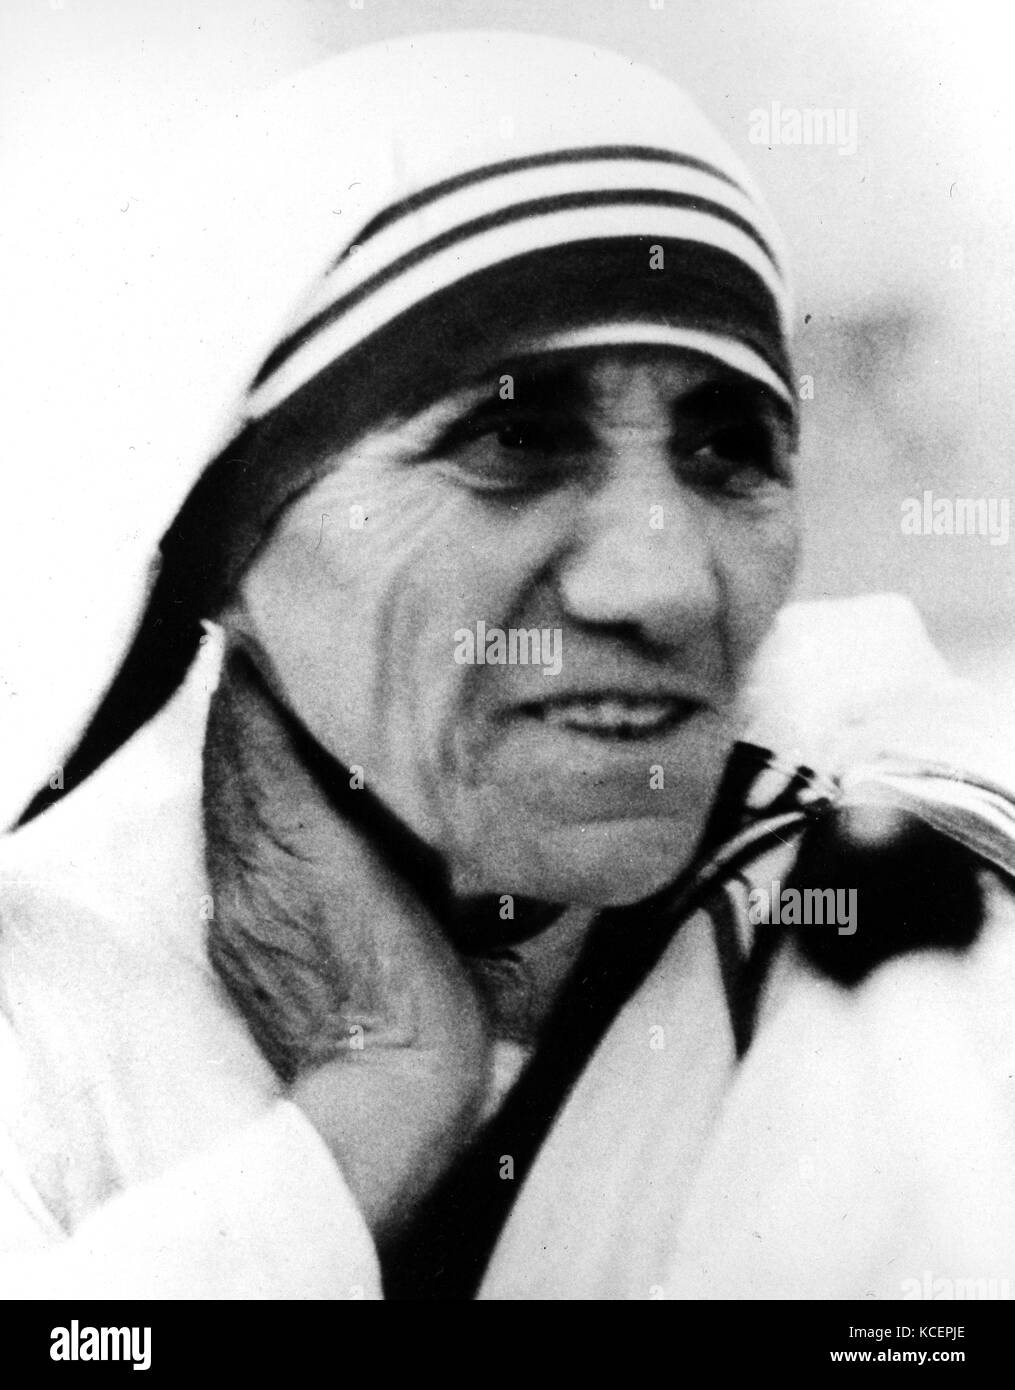 Photograph of Mother Teresa (1910-1997) an Albanian-Indian Roman Catholic nun, missionary, and Noble Peace Prize Laureate. Dated 20th Century Stock Photo